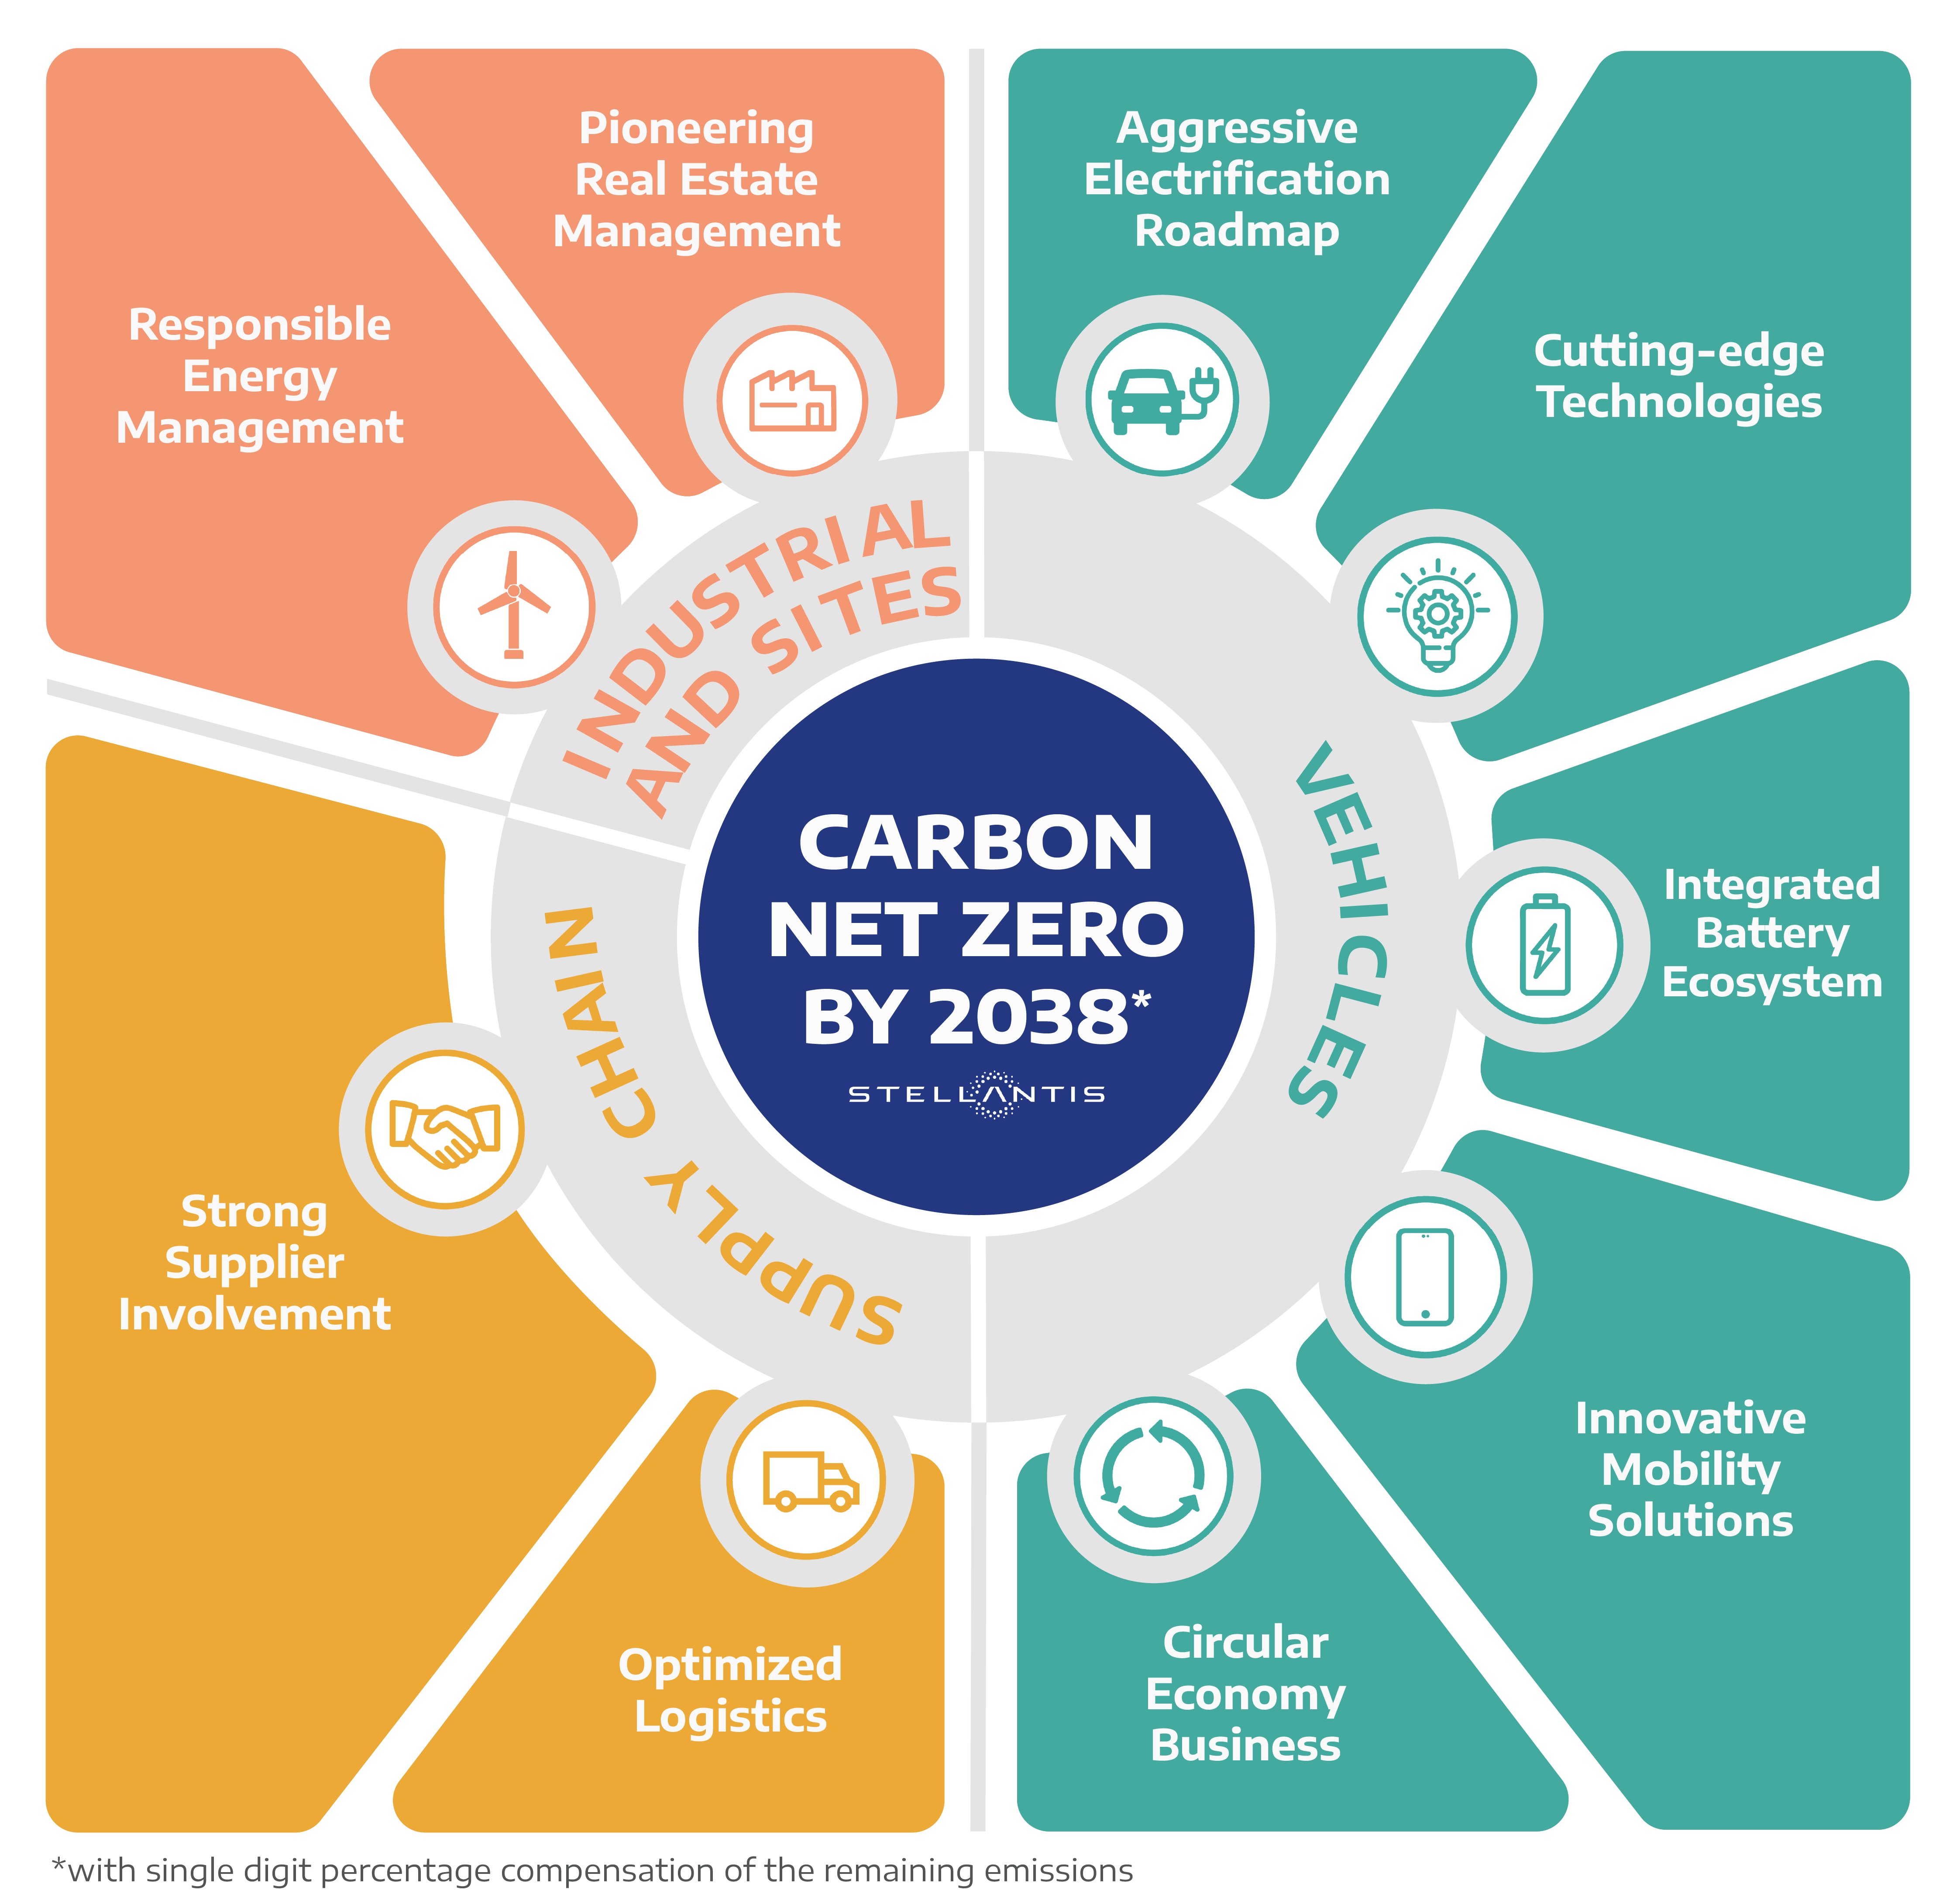 Table of Carbon Net Zero by 2038